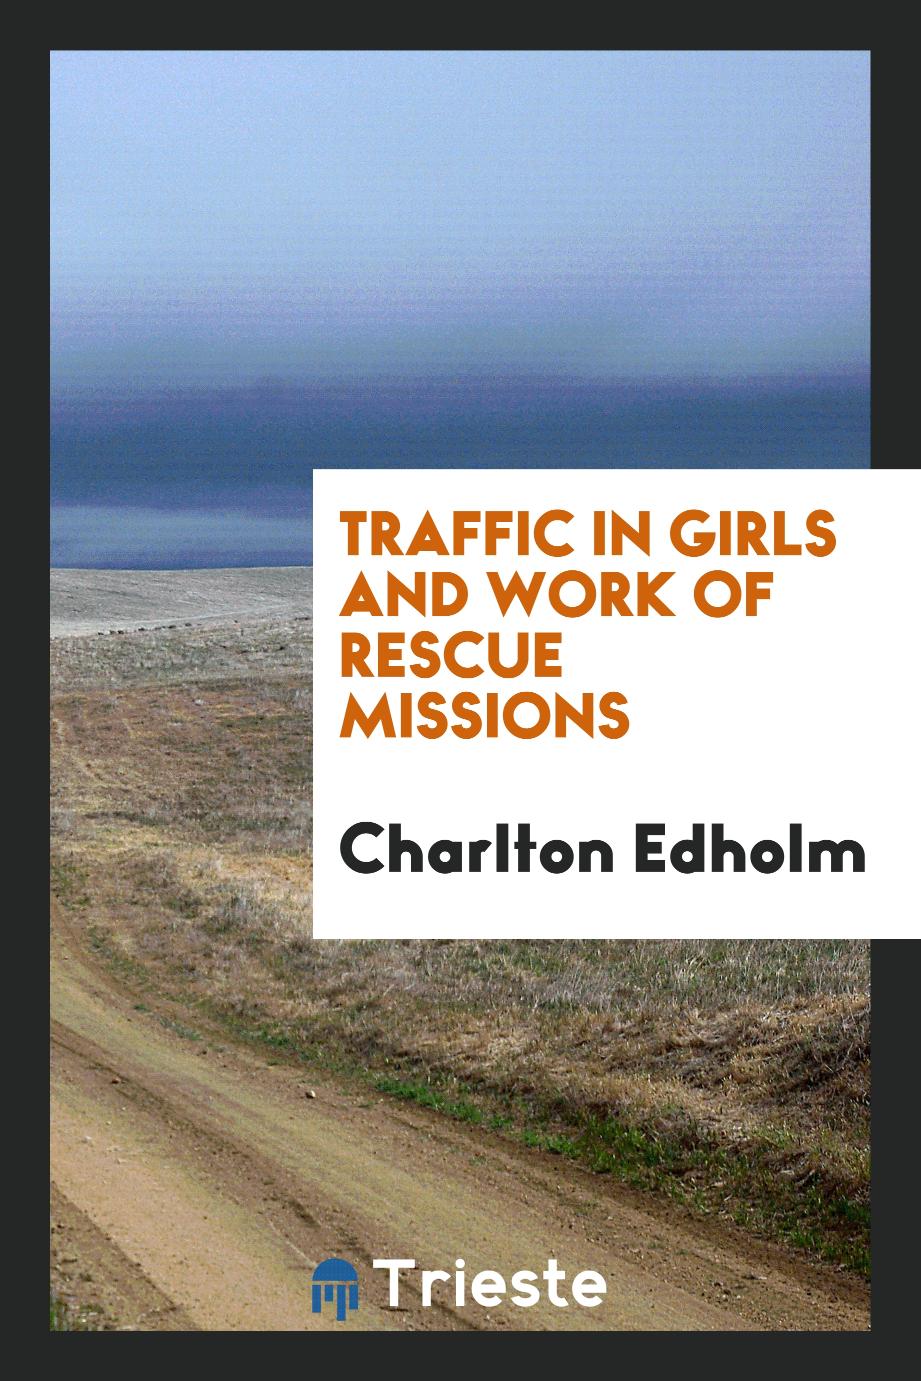 Traffic in Girls and Work of Rescue Missions